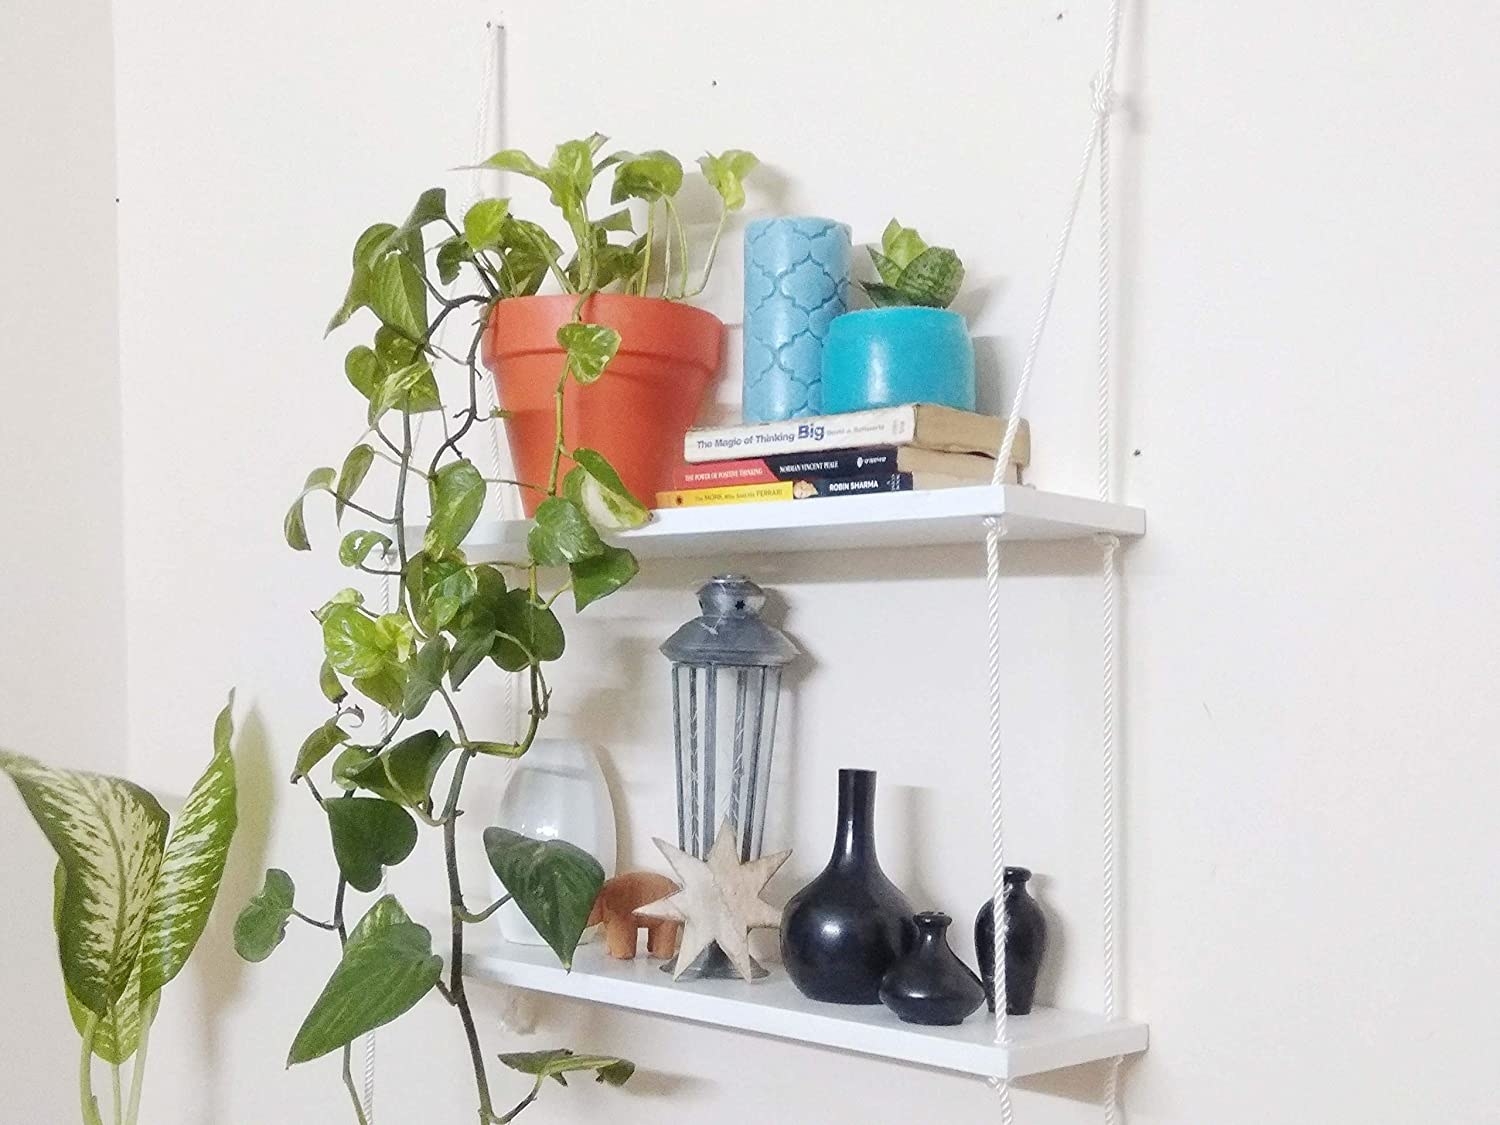 A two-tier shelf held together by sturdy ropes, with books, candles, and a plant on it.